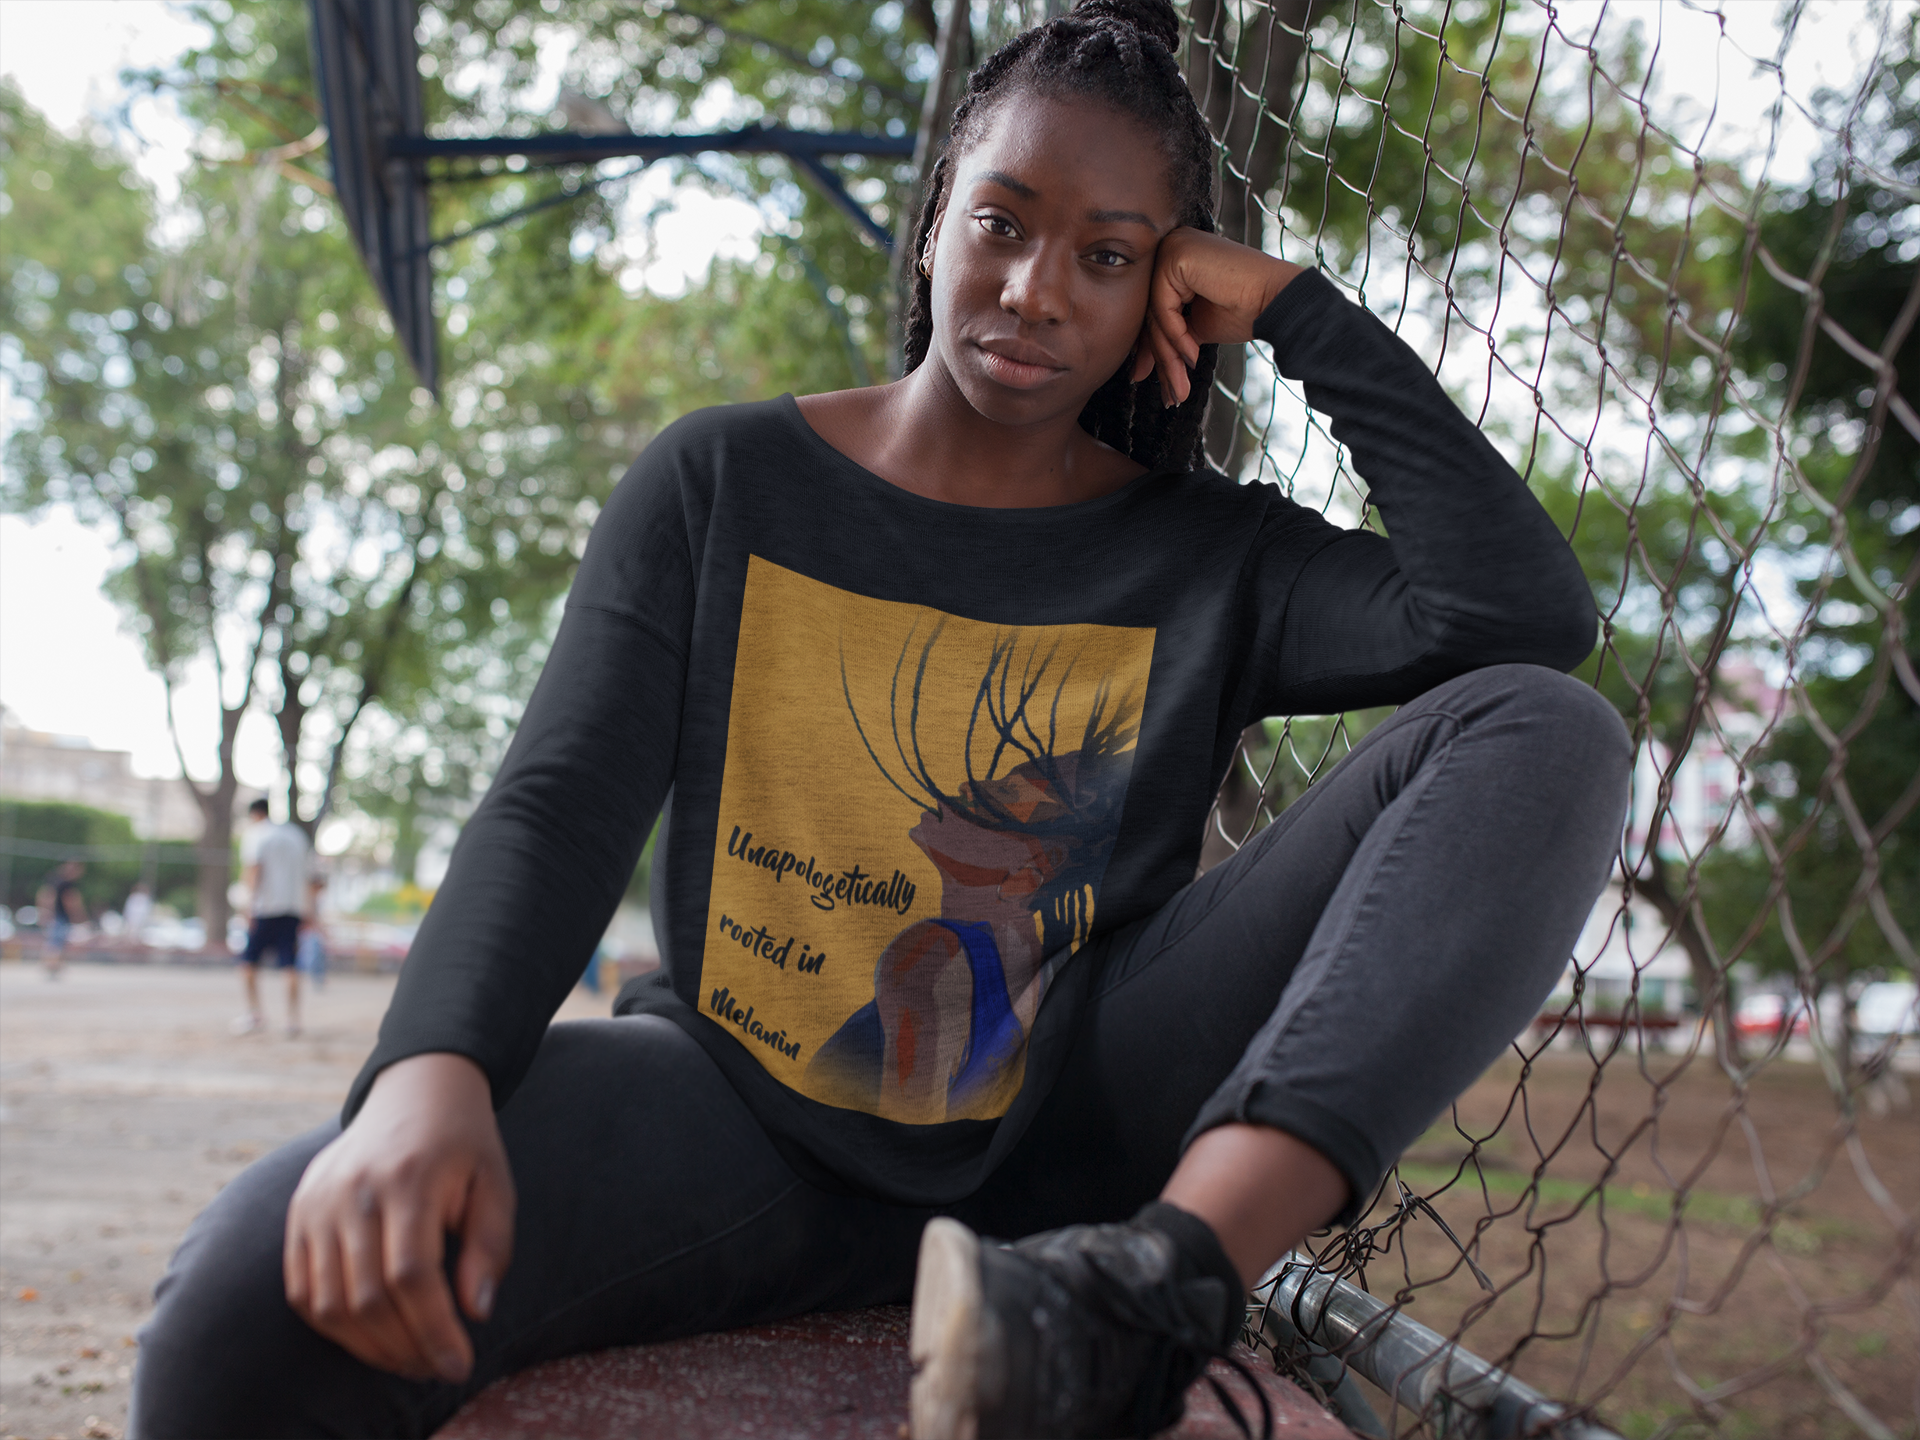 Unapollogetically Rooted in Melanin Short-Sleeve T-Shirt